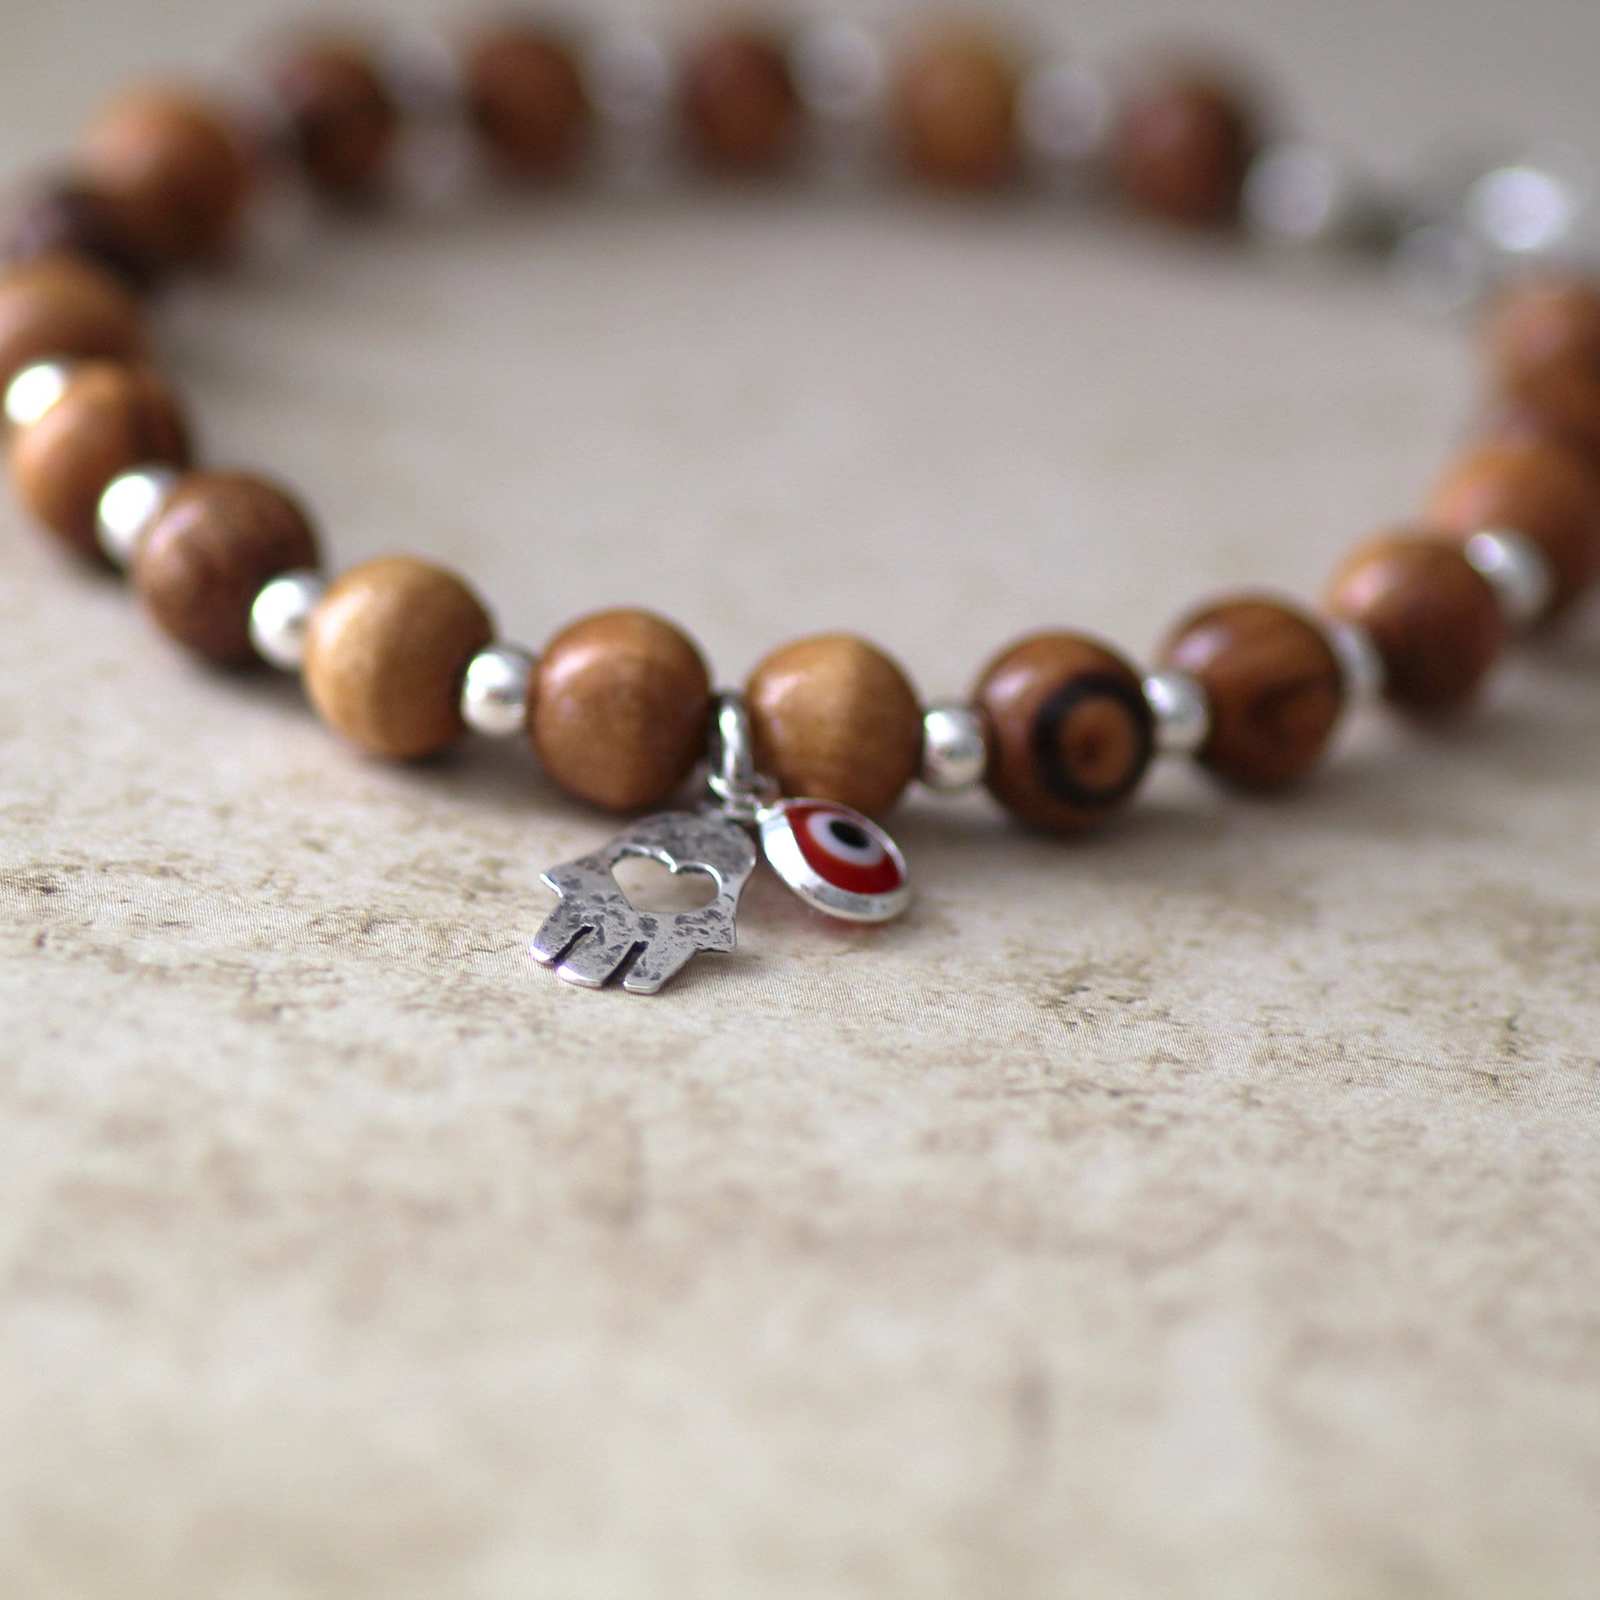 Primary image for Spiritual Harmony Handcrafted Hamsa Charm Bracelet for Energy & Protection 